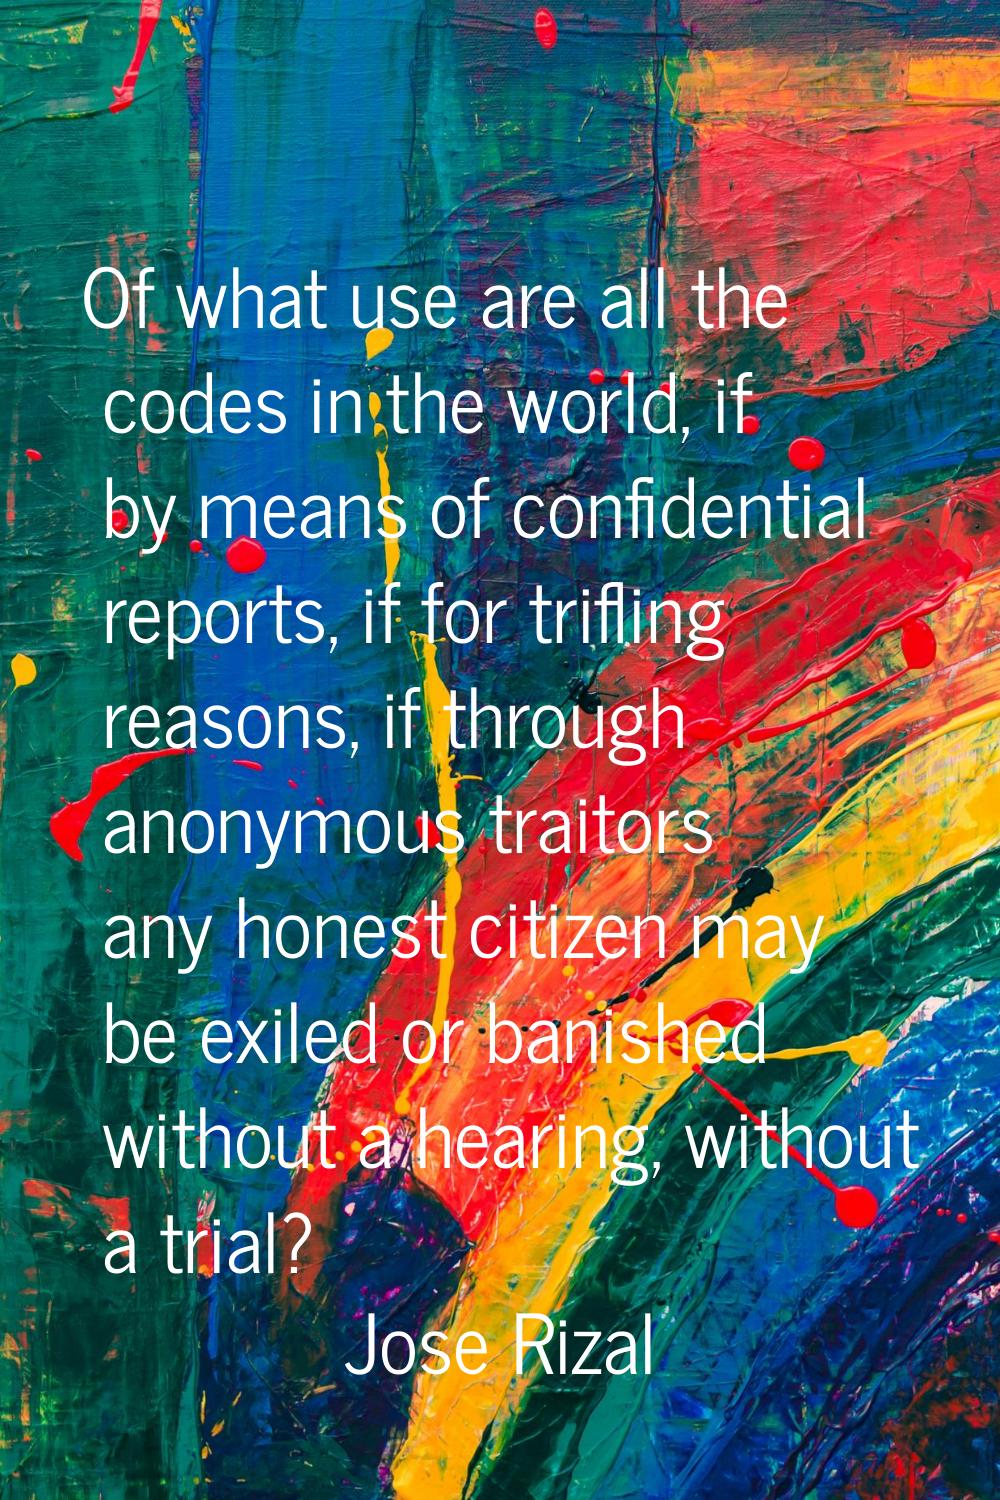 Of what use are all the codes in the world, if by means of confidential reports, if for trifling re